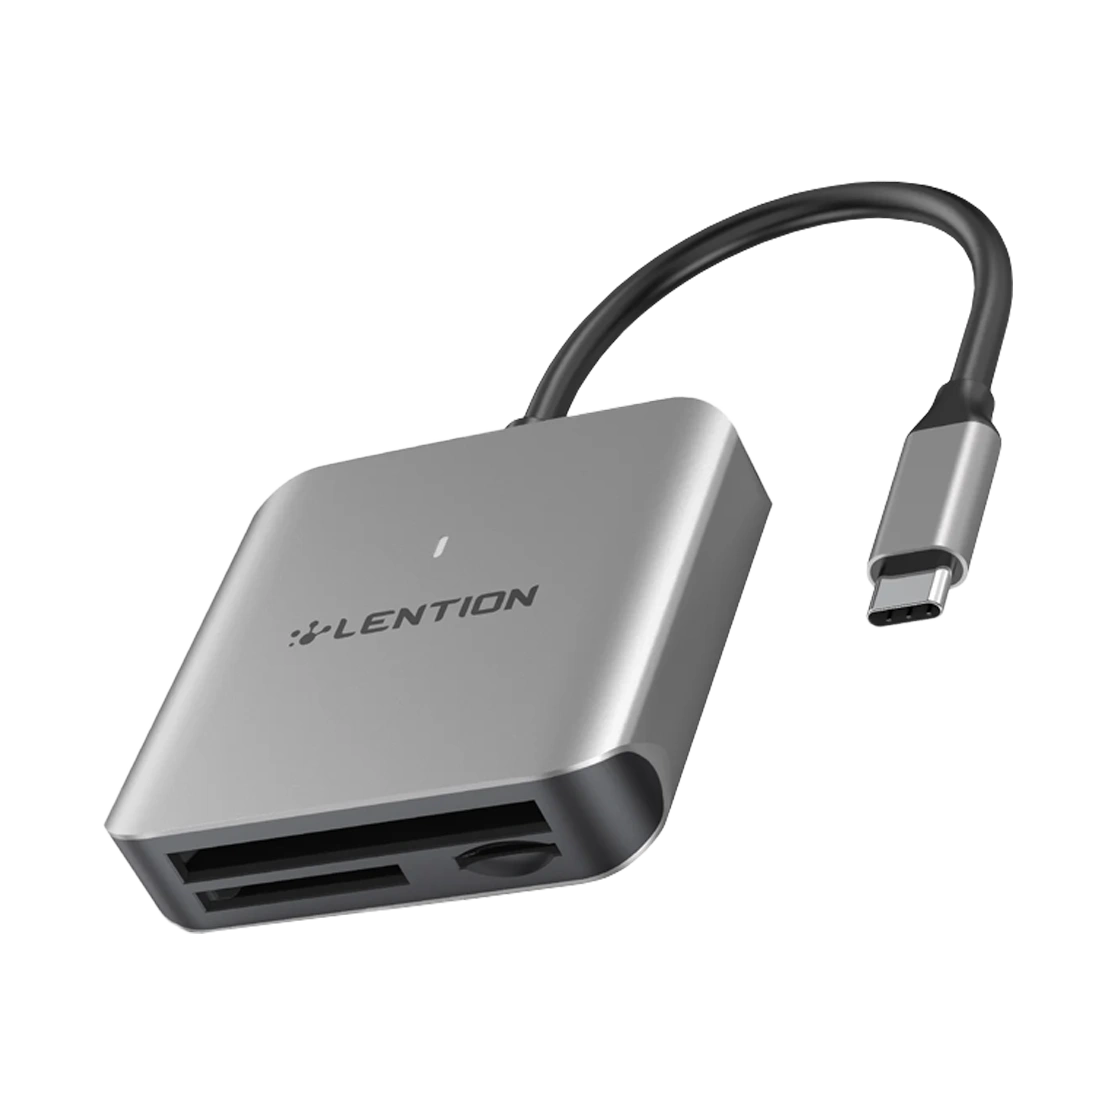 Lention USB-C to CF SD TF Card Reader C8sCR